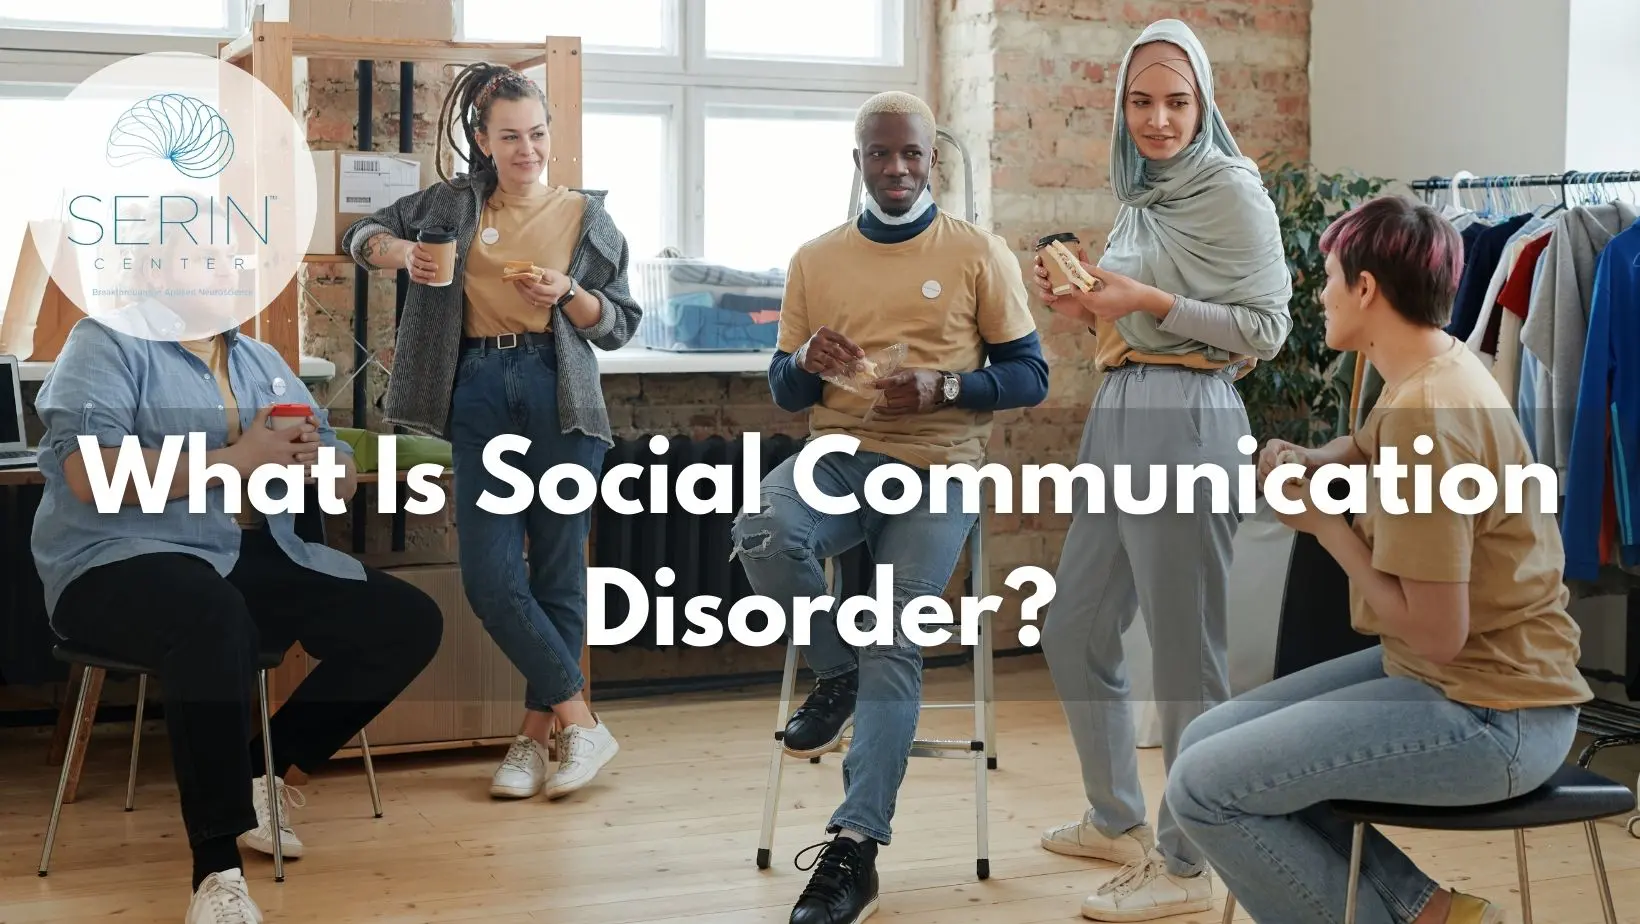 Social Communication Disorders, also known as SCD, refer to a condition that impacts an individual's ability to effectively communicate and interact socially.